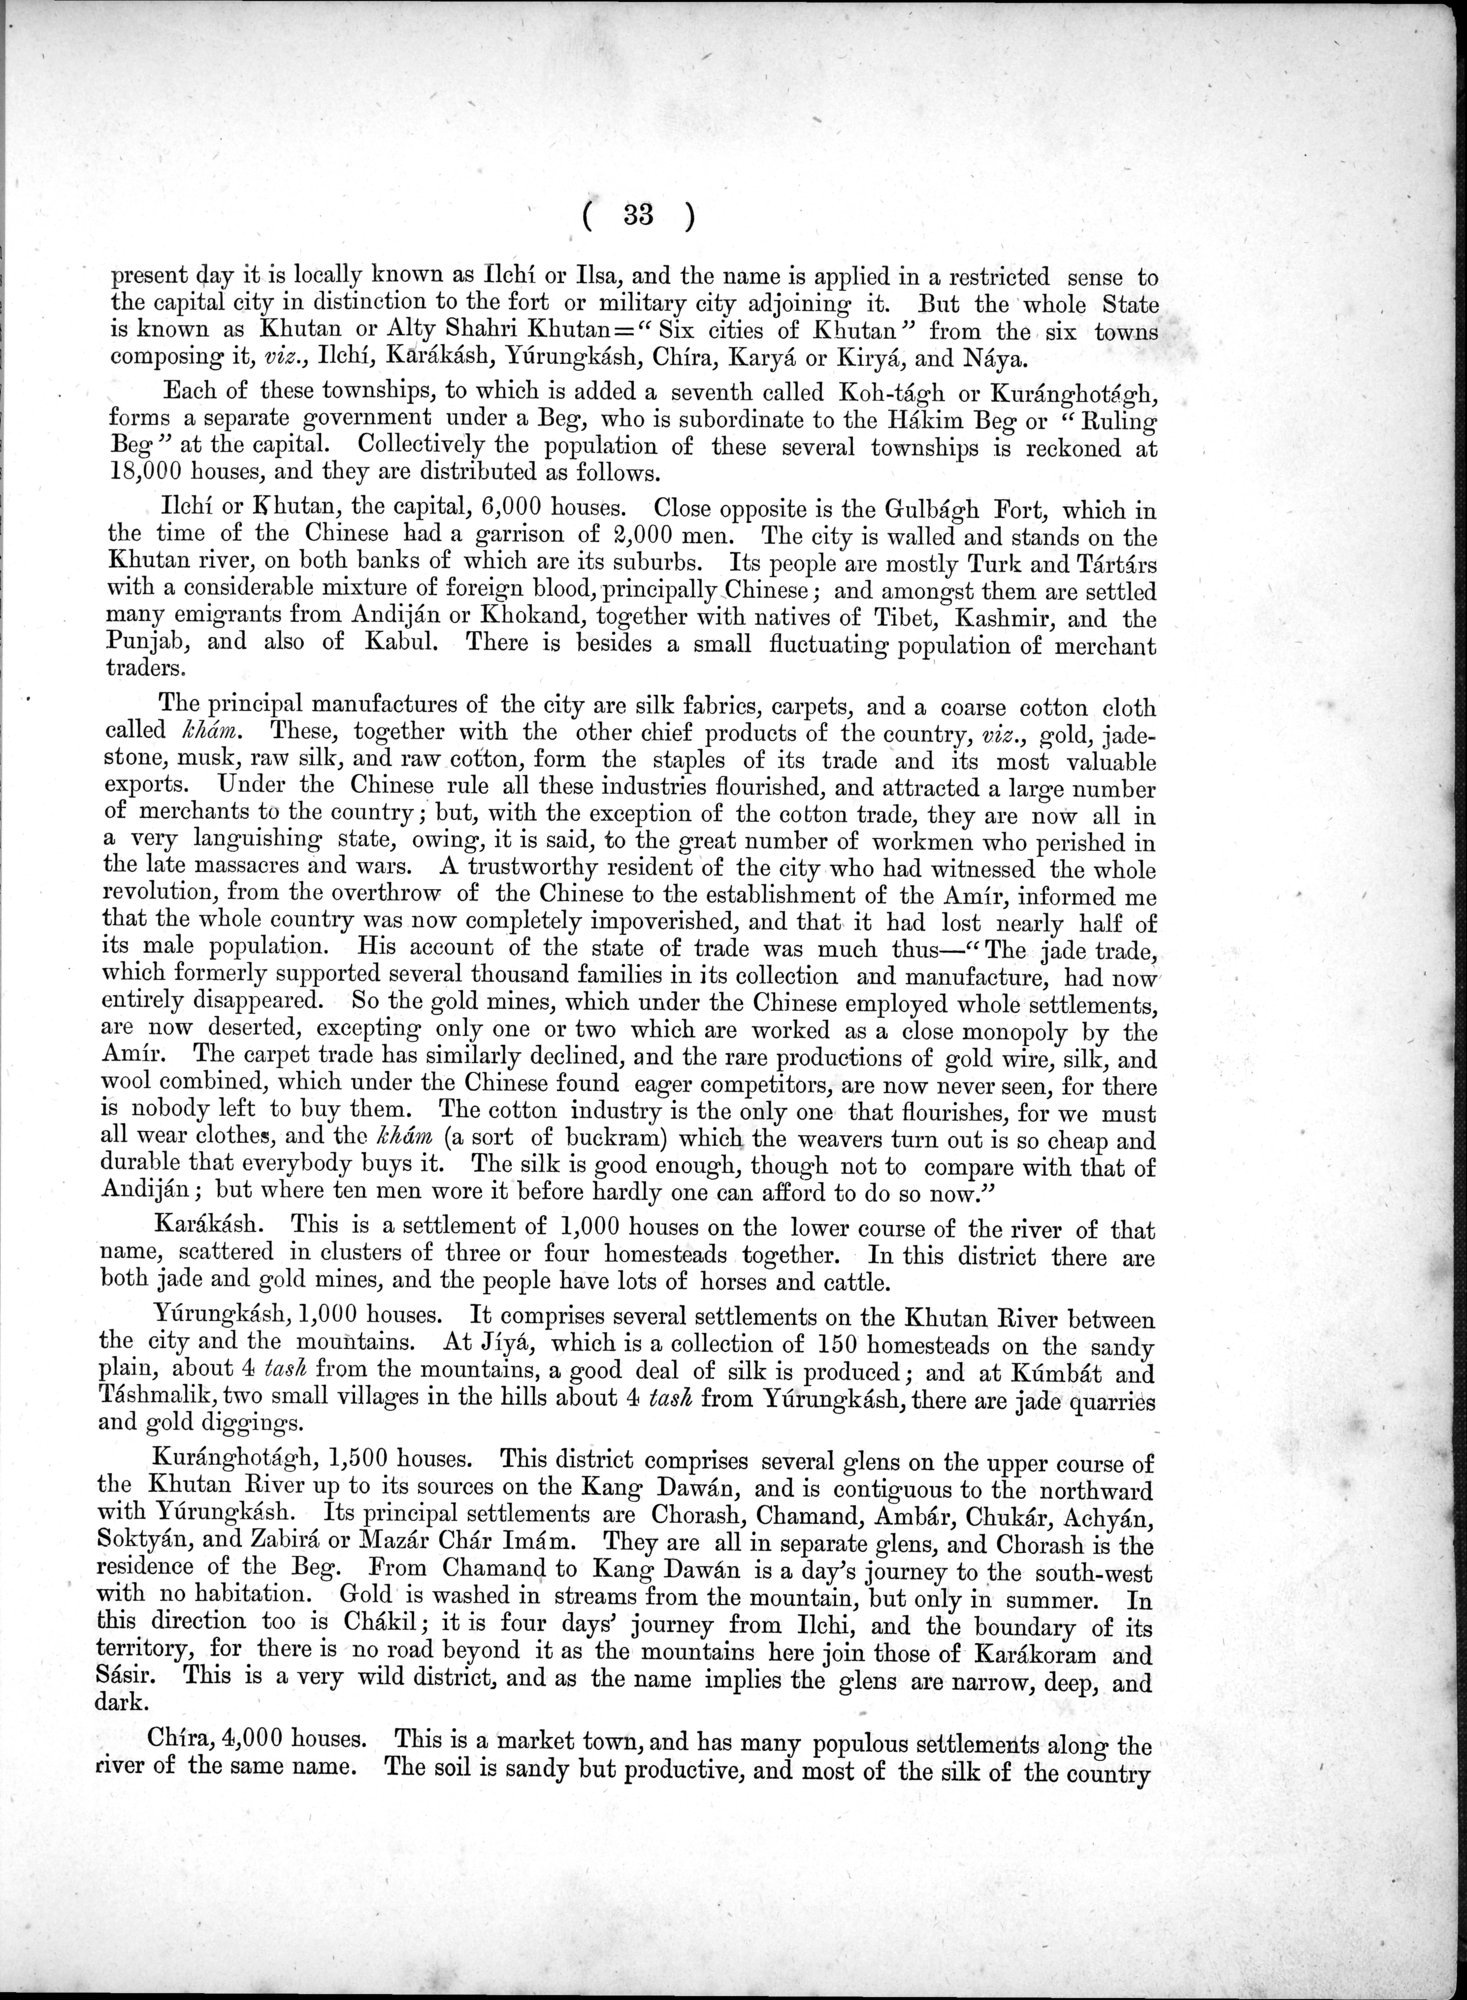 Report of a Mission to Yarkund in 1873 : vol.1 / Page 65 (Grayscale High Resolution Image)